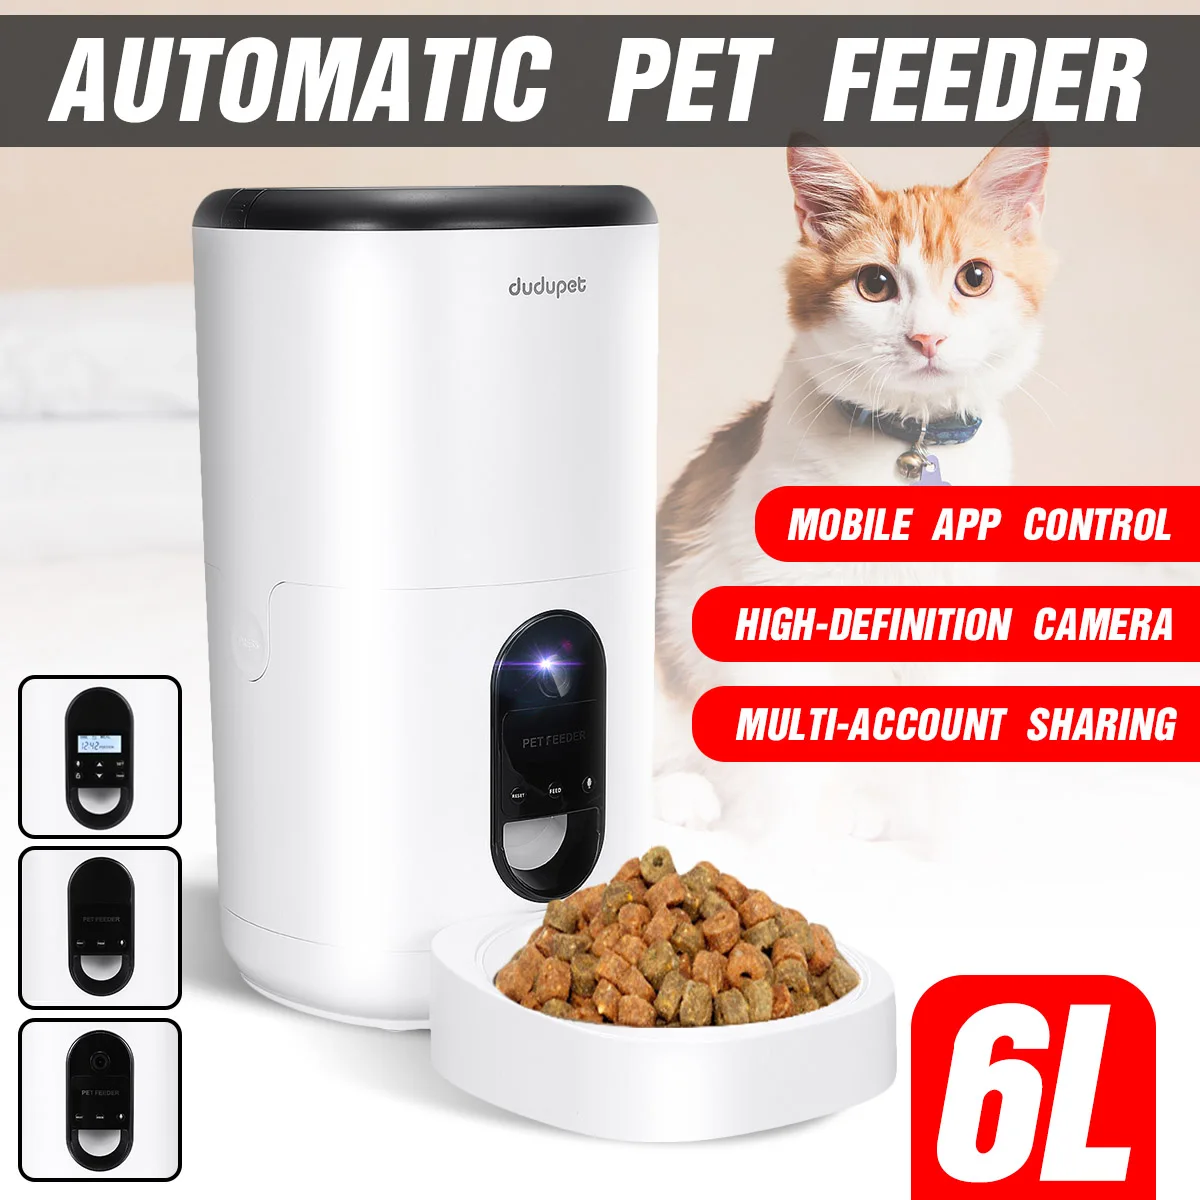 

New 6L Automatic Pet Feeder Smart 10S Voice Recorder APP Control Timer Feeding Cat Dog Food Dispenser[Video/WiFi/Button Version]